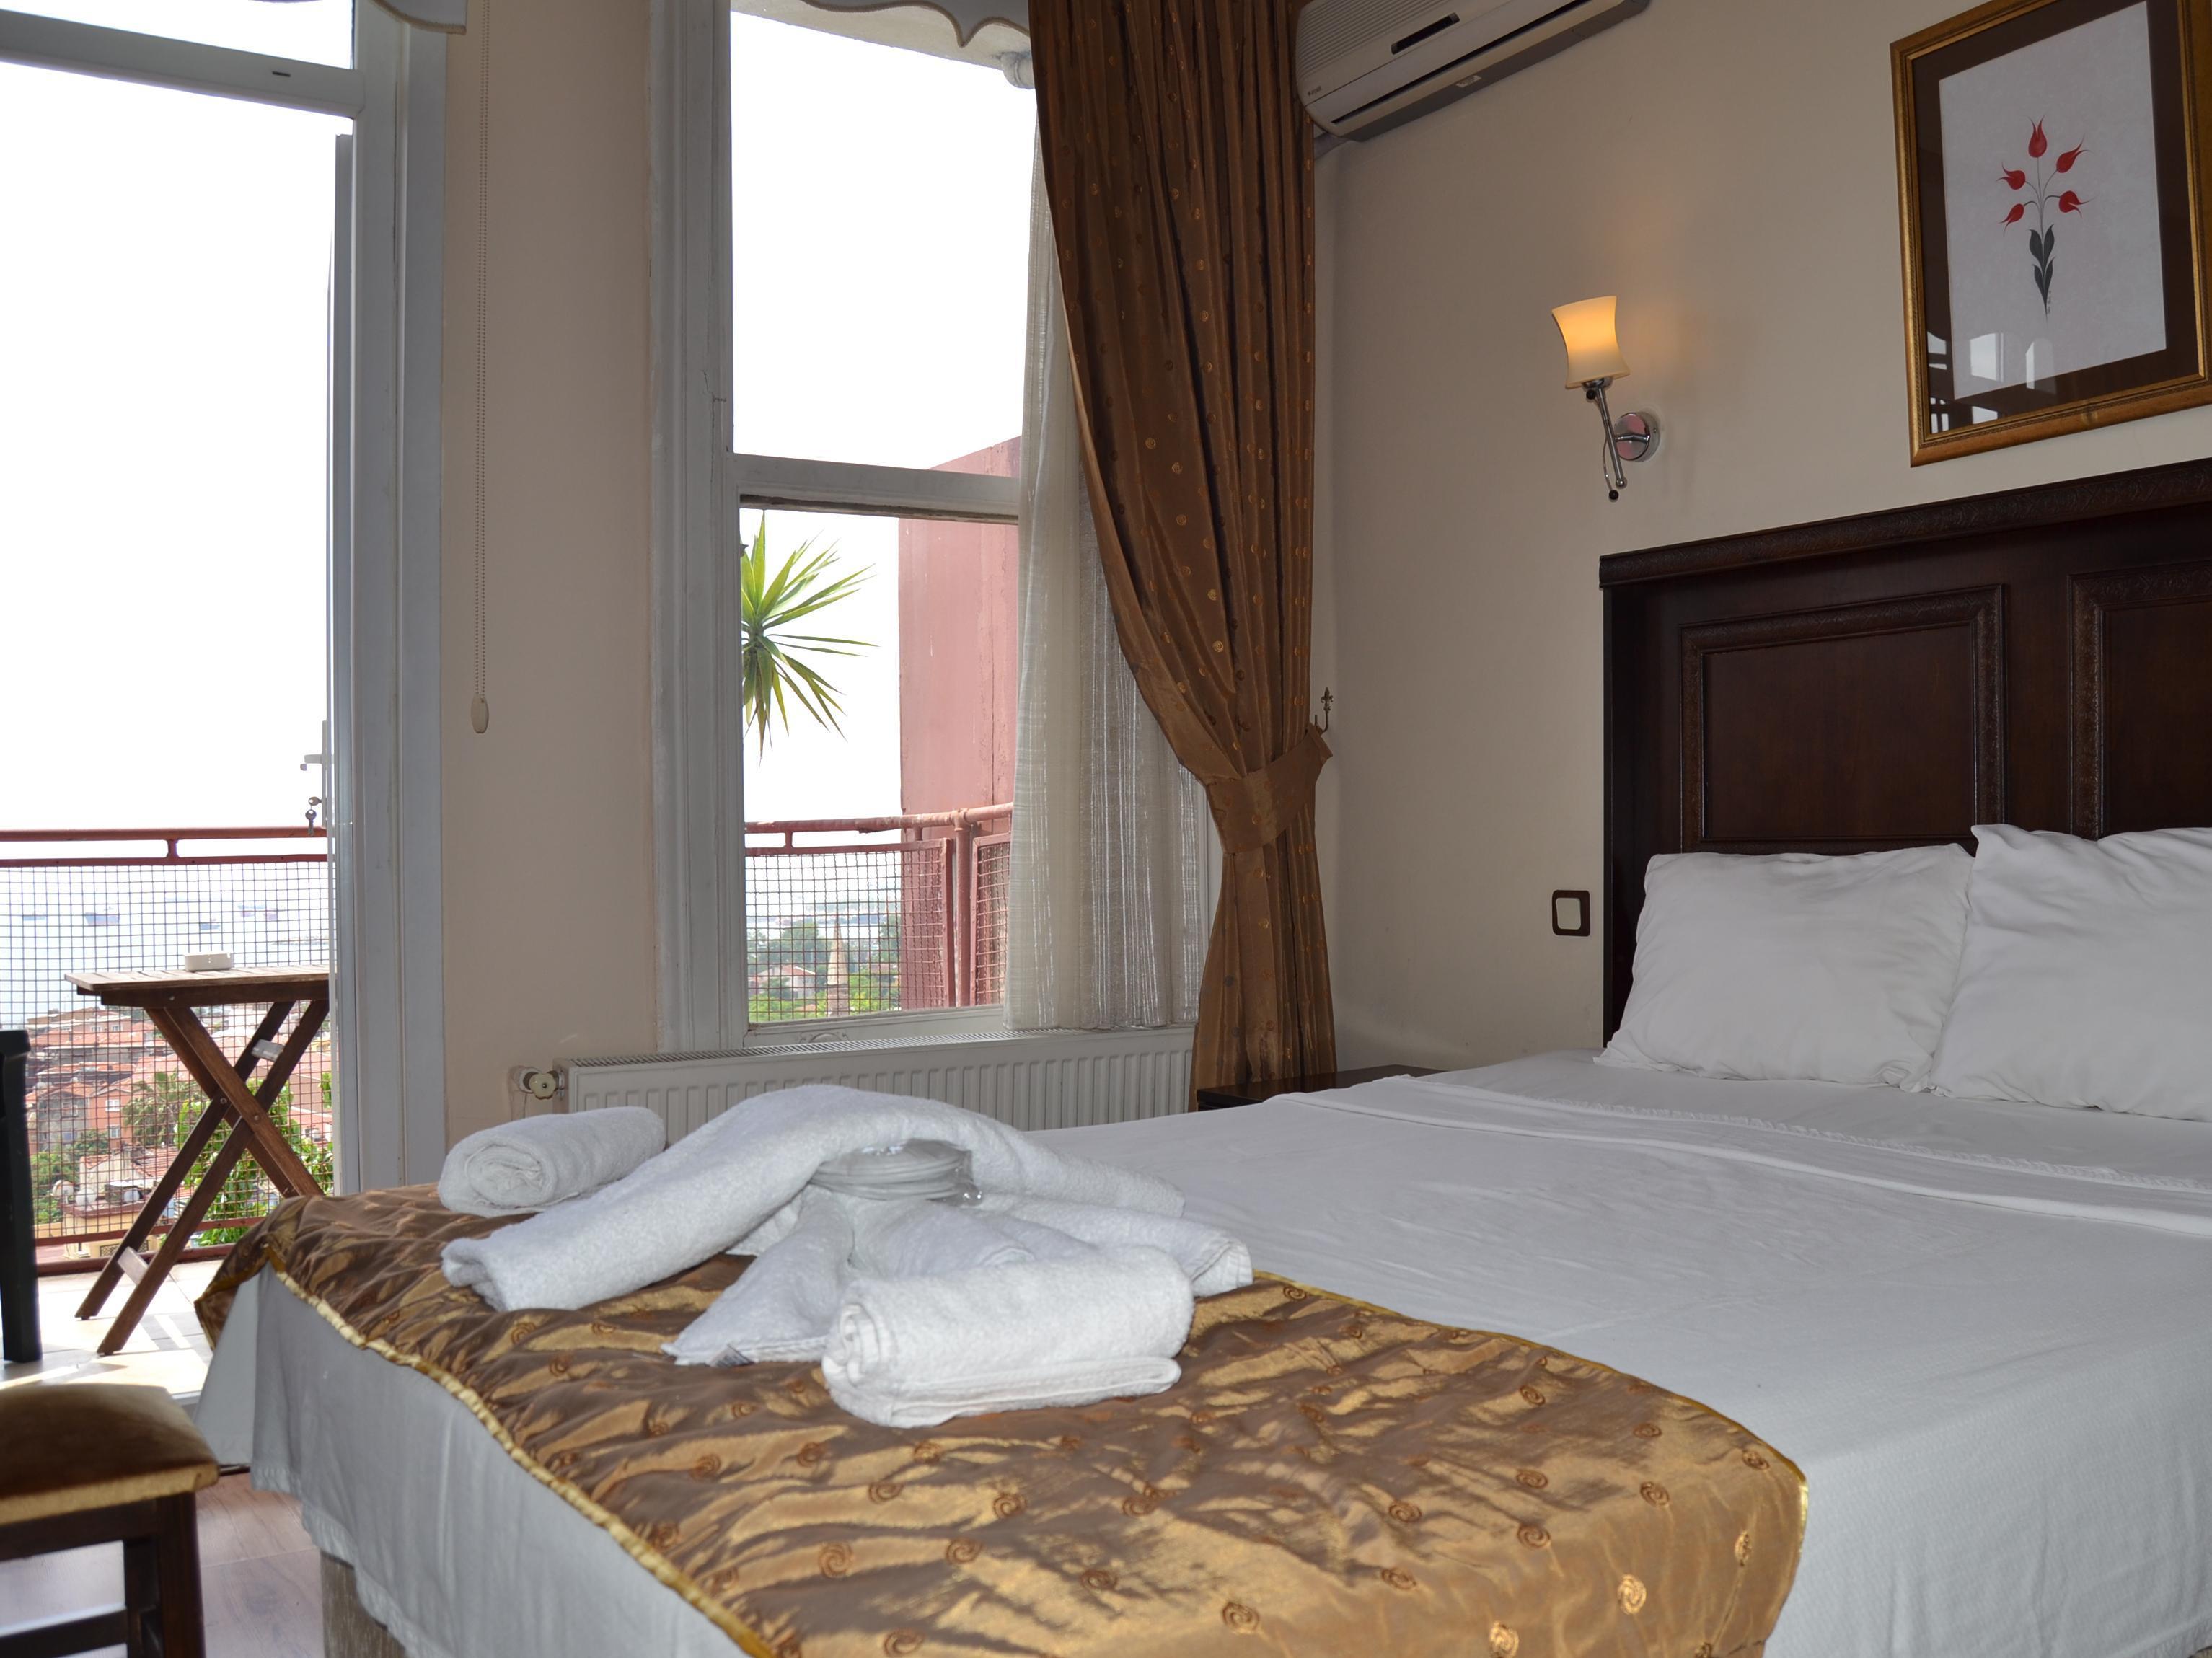 Hotel Tulip House Istanbul FAQ 2016, What facilities are there in Hotel Tulip House Istanbul 2016, What Languages Spoken are Supported in Hotel Tulip House Istanbul 2016, Which payment cards are accepted in Hotel Tulip House Istanbul , Istanbul Hotel Tulip House room facilities and services Q&A 2016, Istanbul Hotel Tulip House online booking services 2016, Istanbul Hotel Tulip House address 2016, Istanbul Hotel Tulip House telephone number 2016,Istanbul Hotel Tulip House map 2016, Istanbul Hotel Tulip House traffic guide 2016, how to go Istanbul Hotel Tulip House, Istanbul Hotel Tulip House booking online 2016, Istanbul Hotel Tulip House room types 2016.